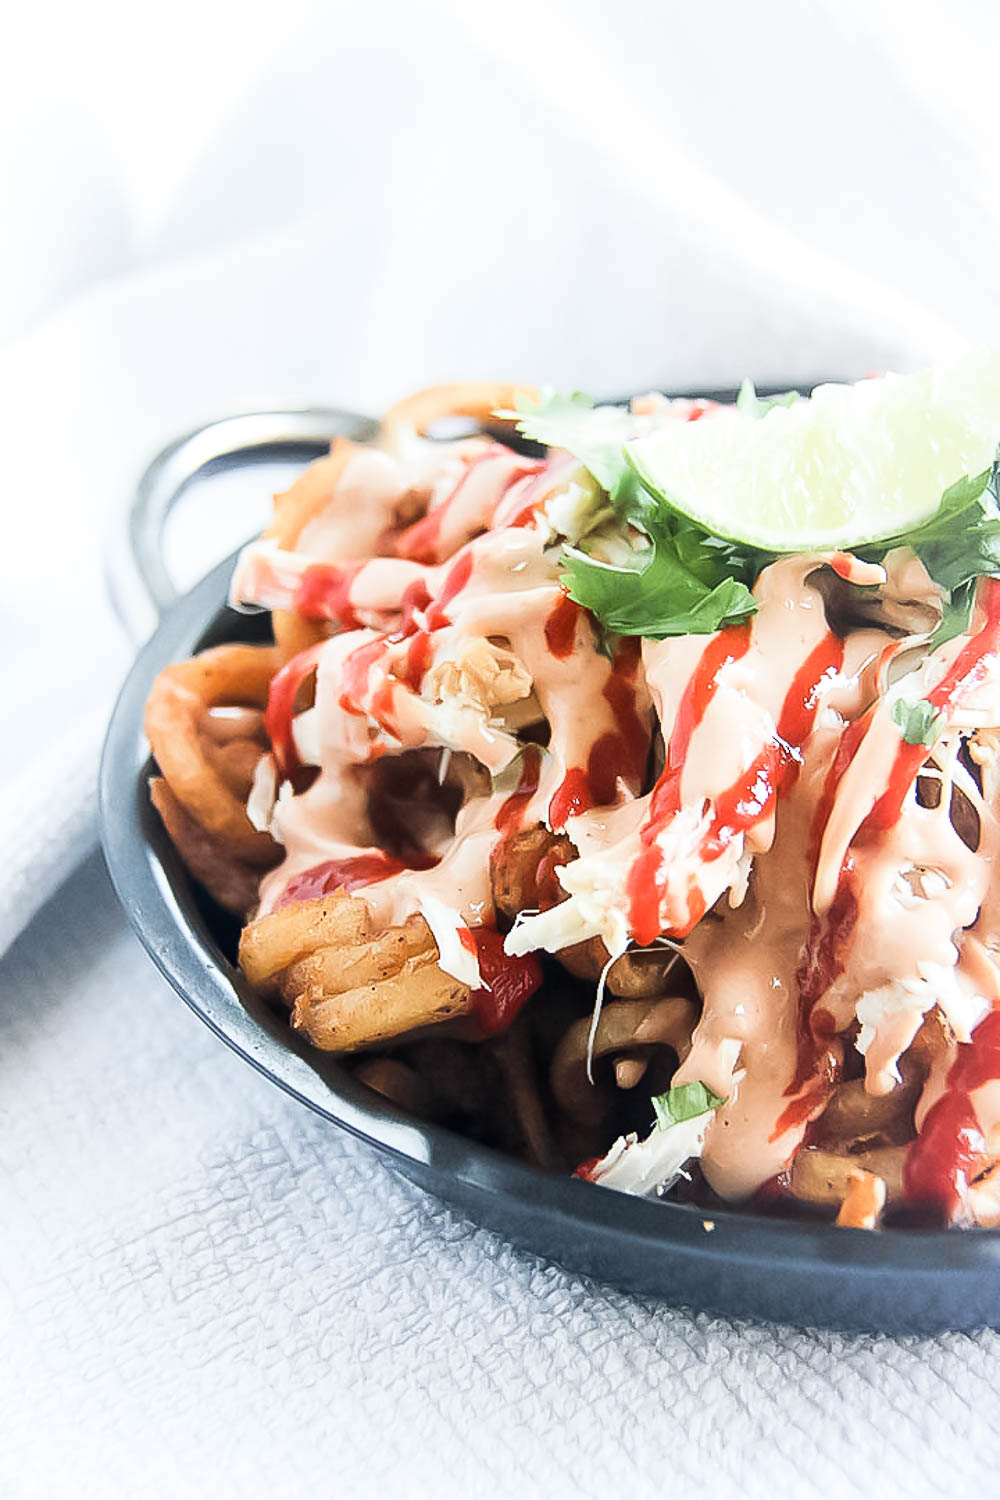 To say I’m addicted to these Chicken Adobo Fries is an understatement because I’ve been enjoying them 3 times a week! Now it’s your turn to enjoy them too!